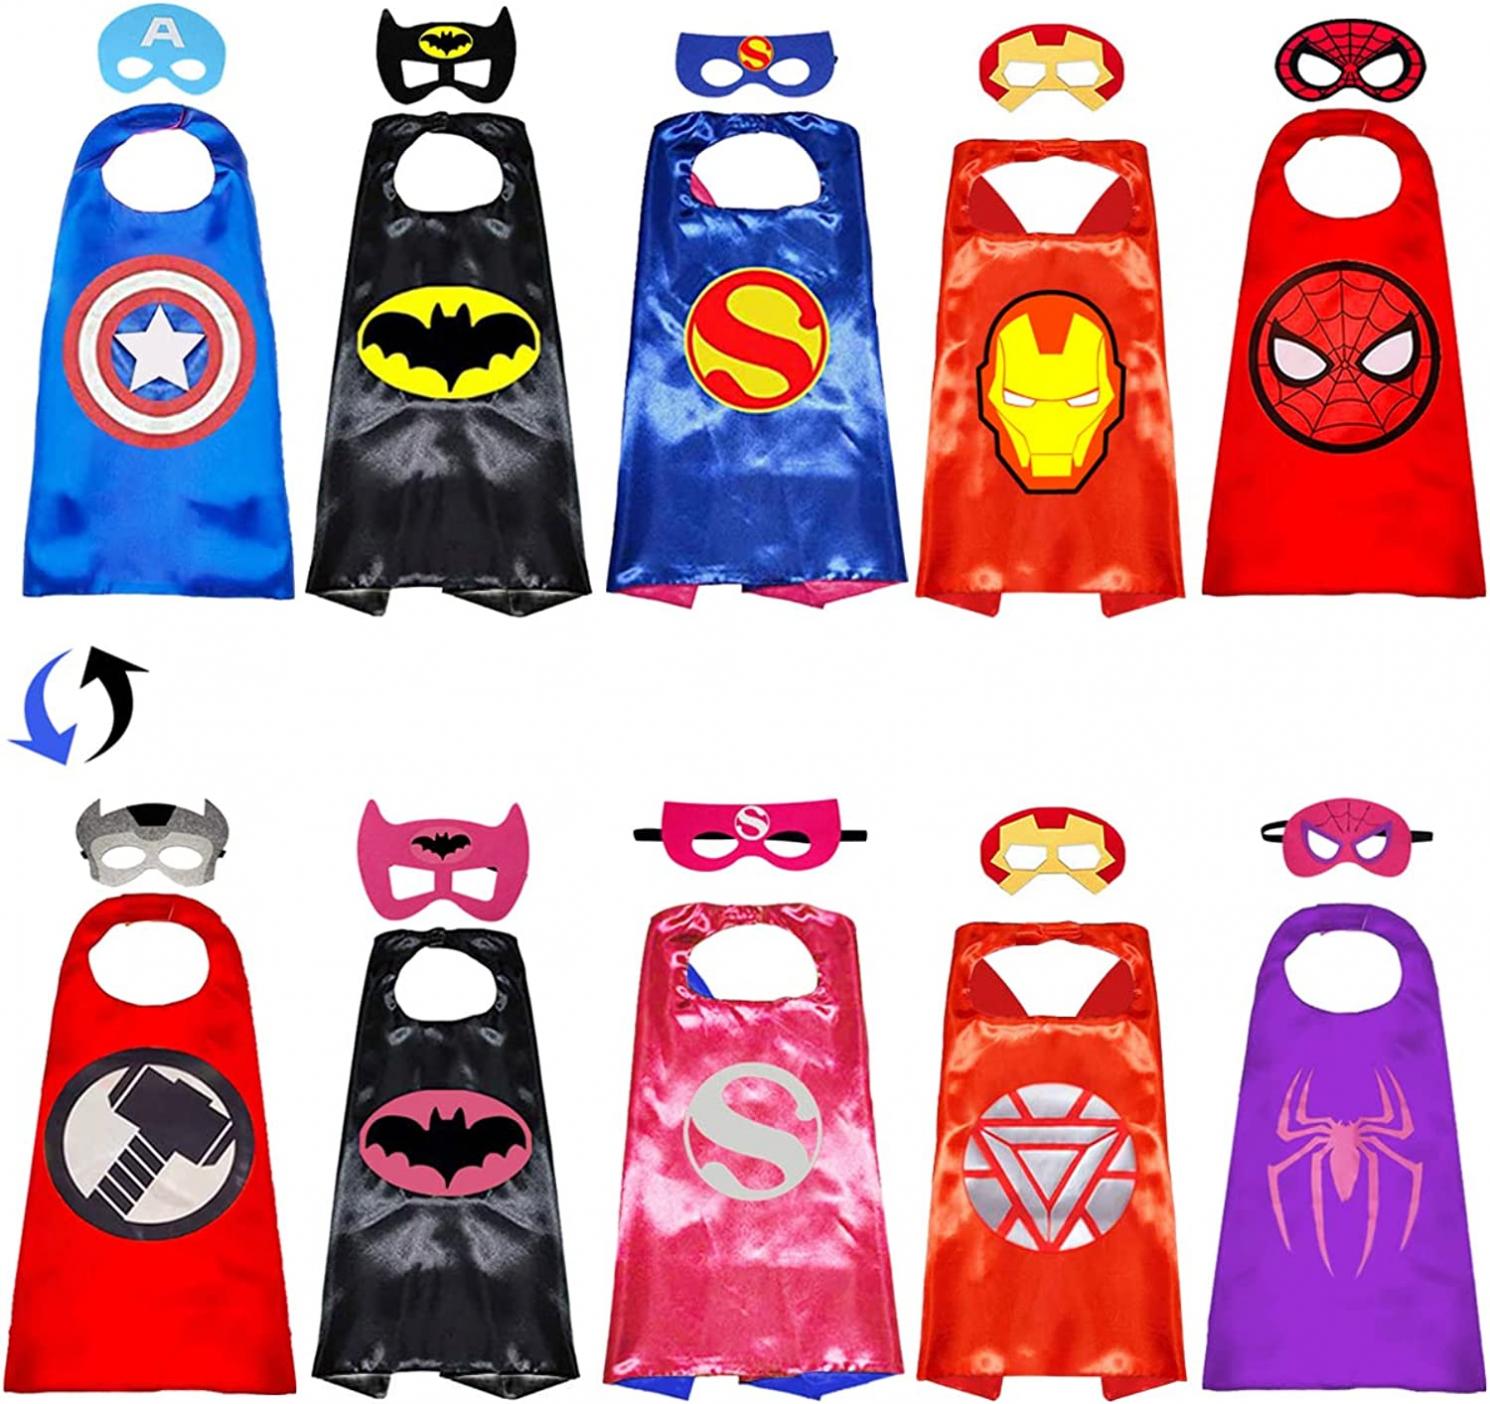 Superhero Capes and Masks Double Side Capes Superhero Dress up Costumes Halloween Cosplay Birthday Party for Kids Gifts